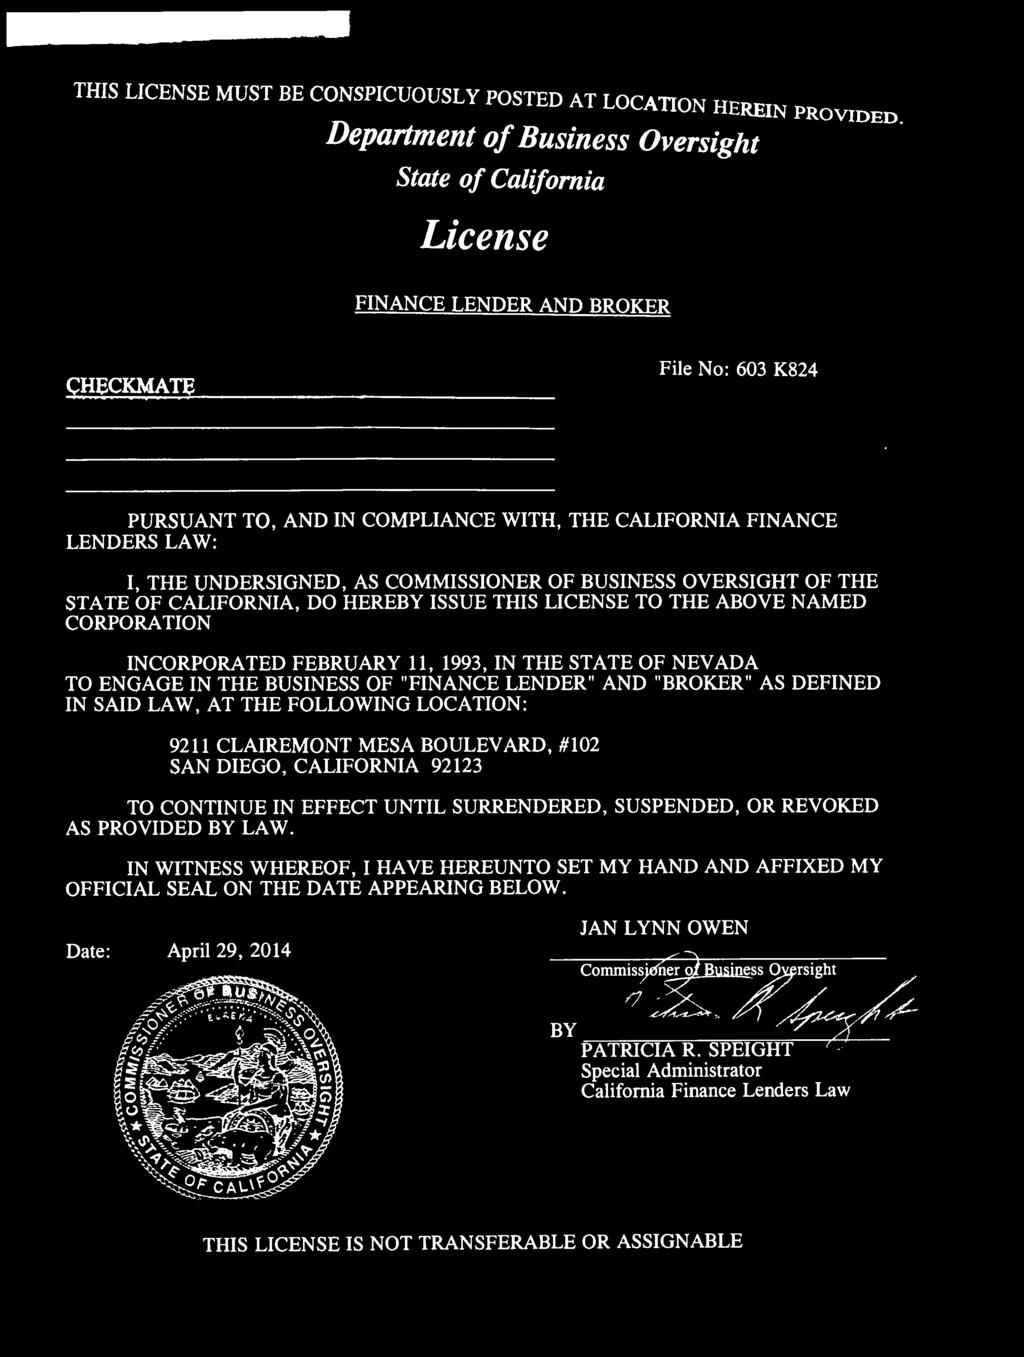 CORPORATION INCORPORATED FEBRUARY 11, 1993, IN THE STATE OF NEVADA TO ENGAGE IN THE BUSINESS OF "FINANCE LENDER" AND "BROKER" AS DEFINED IN SAID LAW, AT THE FOLLOWING LOCATION: 9211 CLAIREMONT MESA